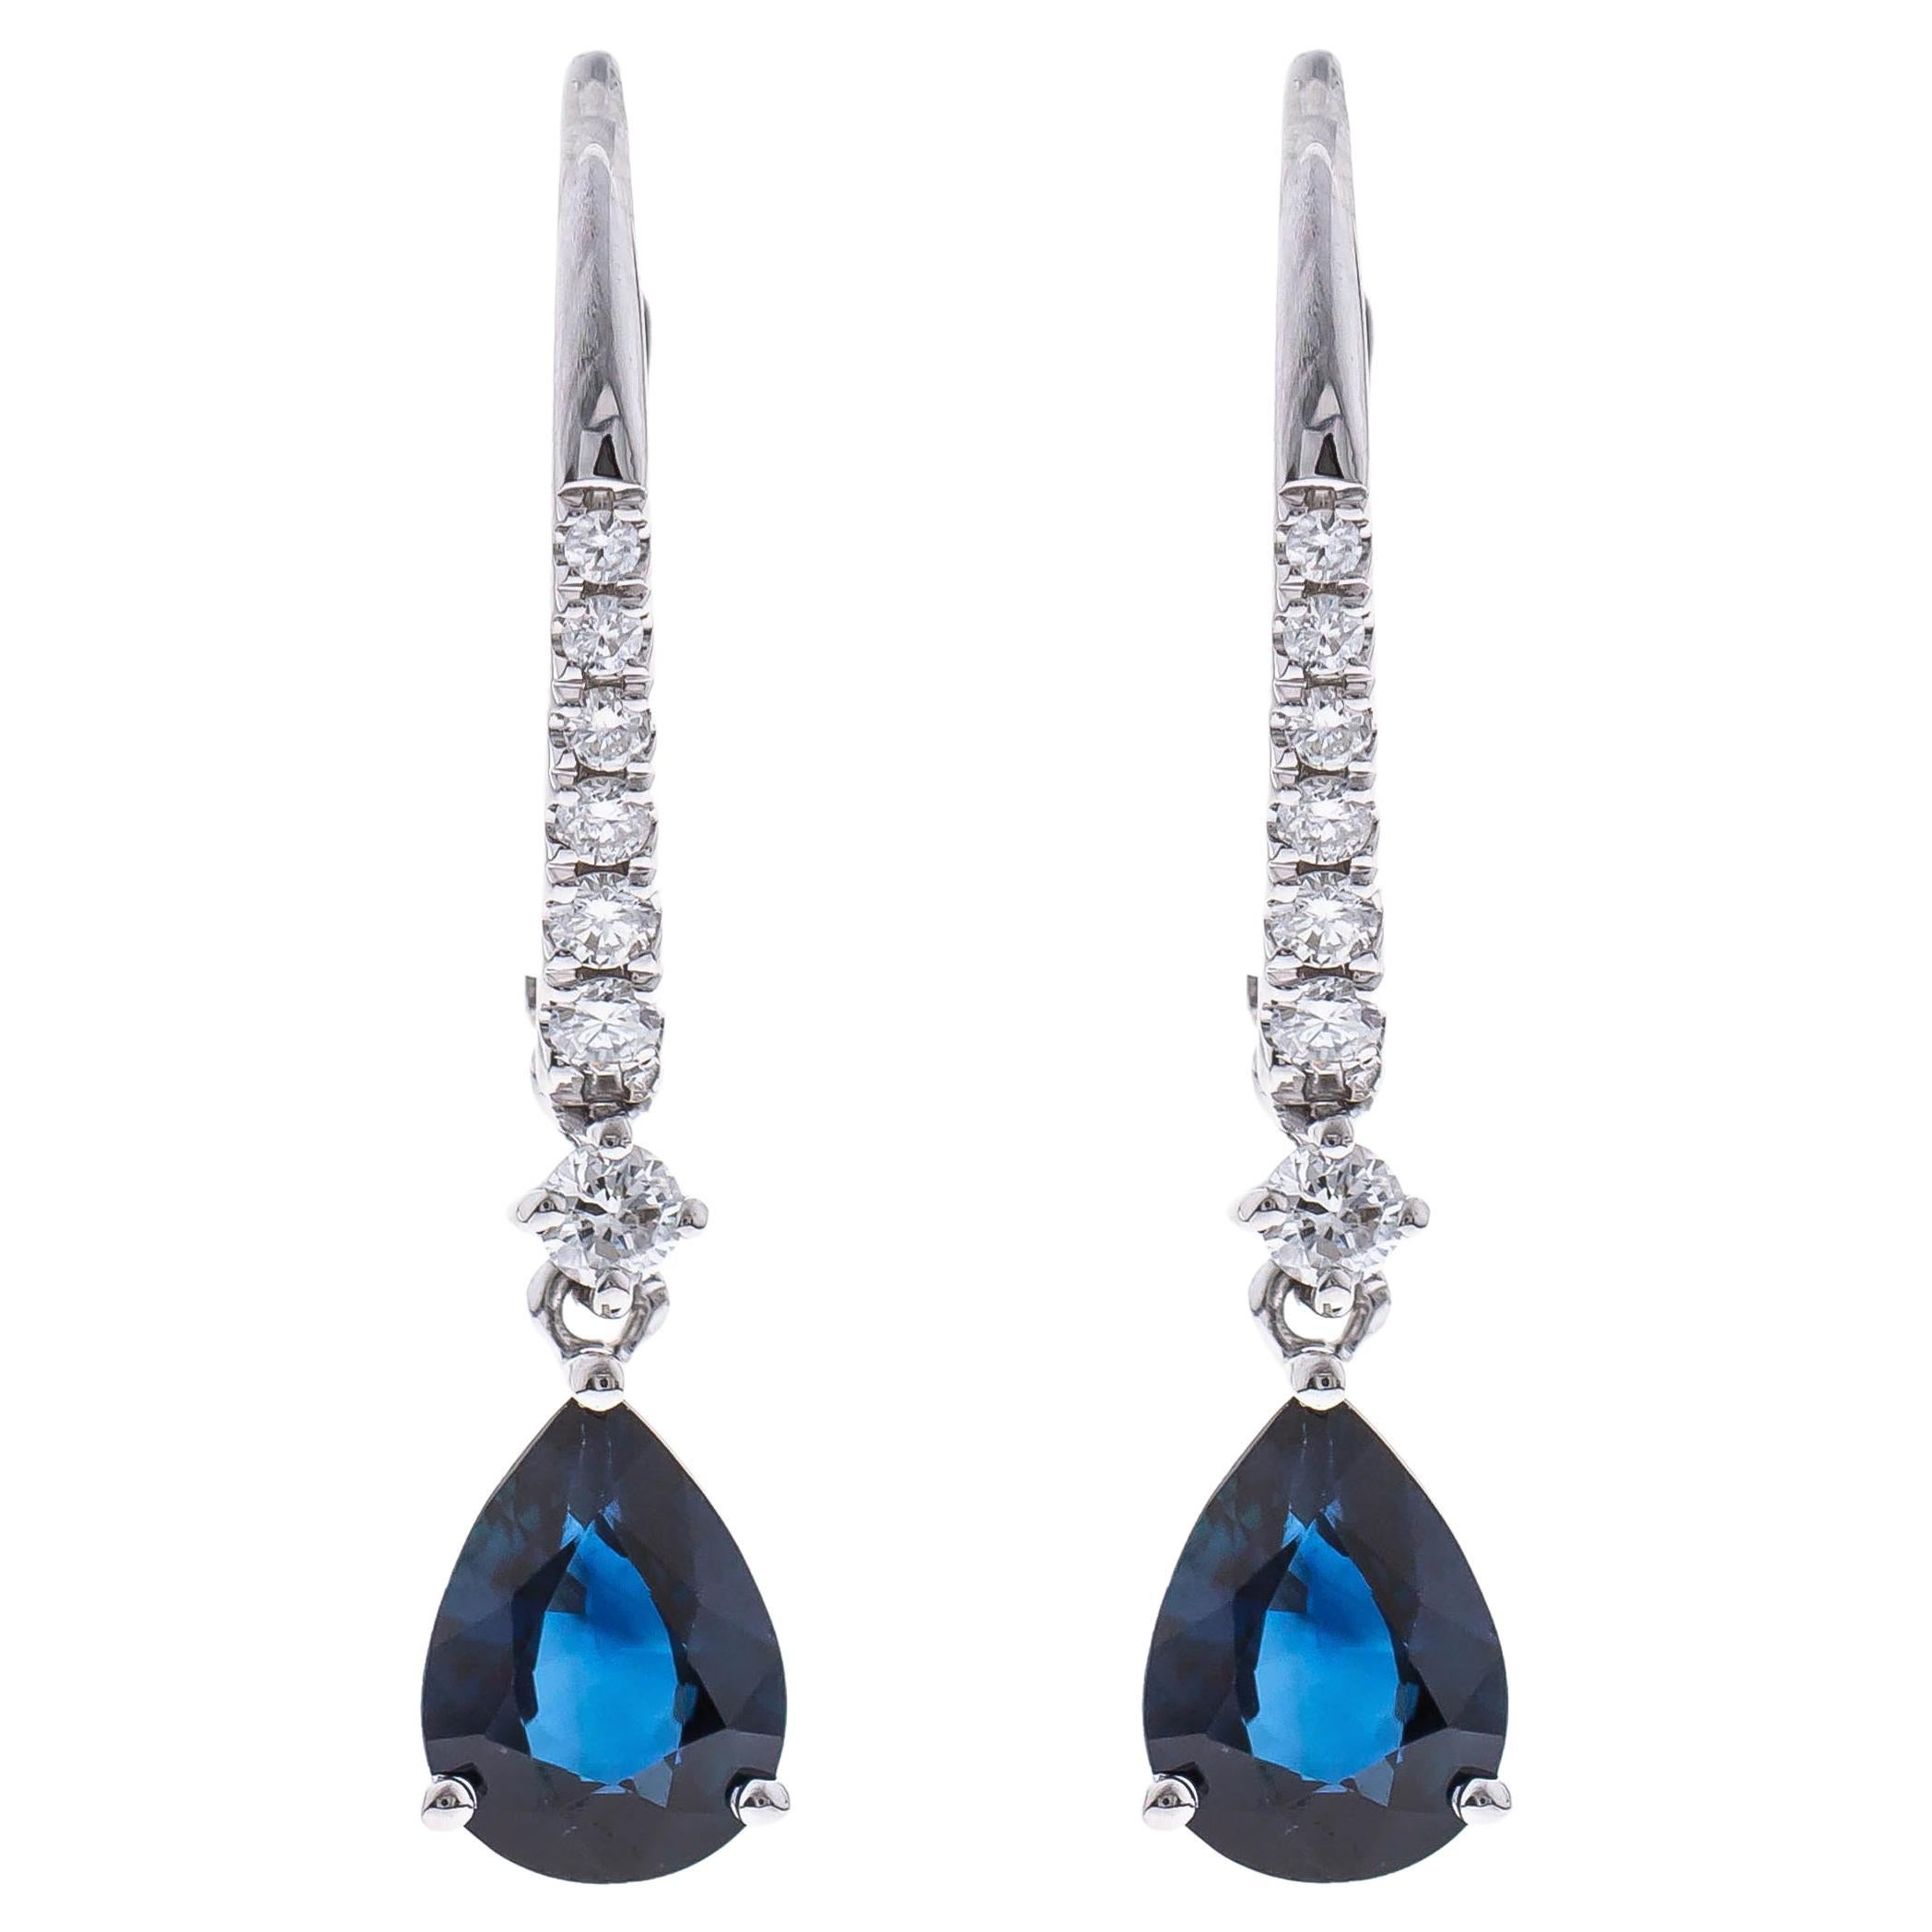 1.49 carat Pear-cut Blue Sapphire With Diamond accents 14K White Gold Earring. For Sale